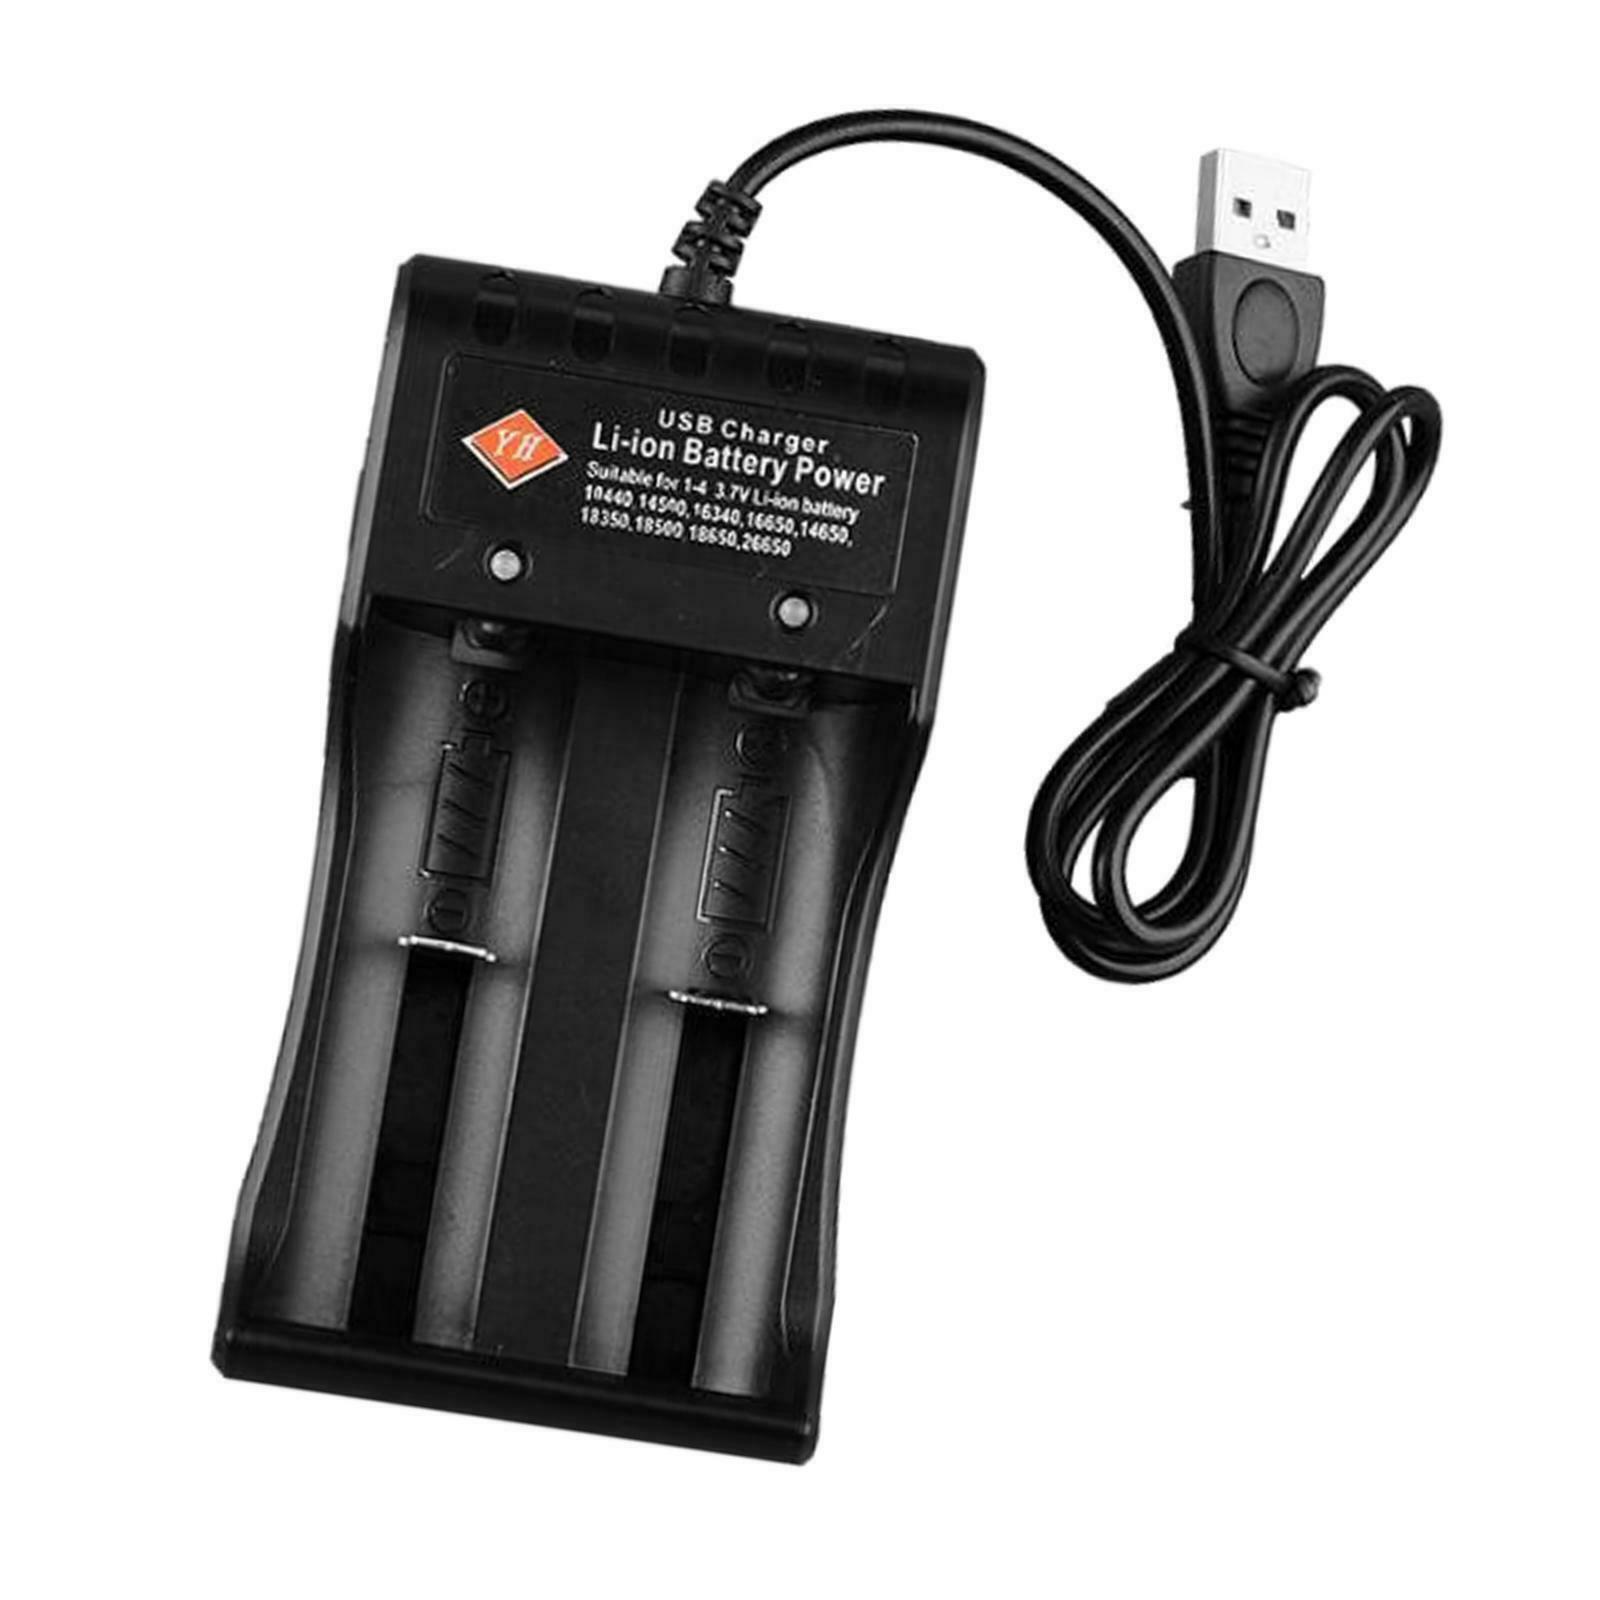 Mini Battery Charger Smart Universal Battery Charger for 18650 3.7V Battery